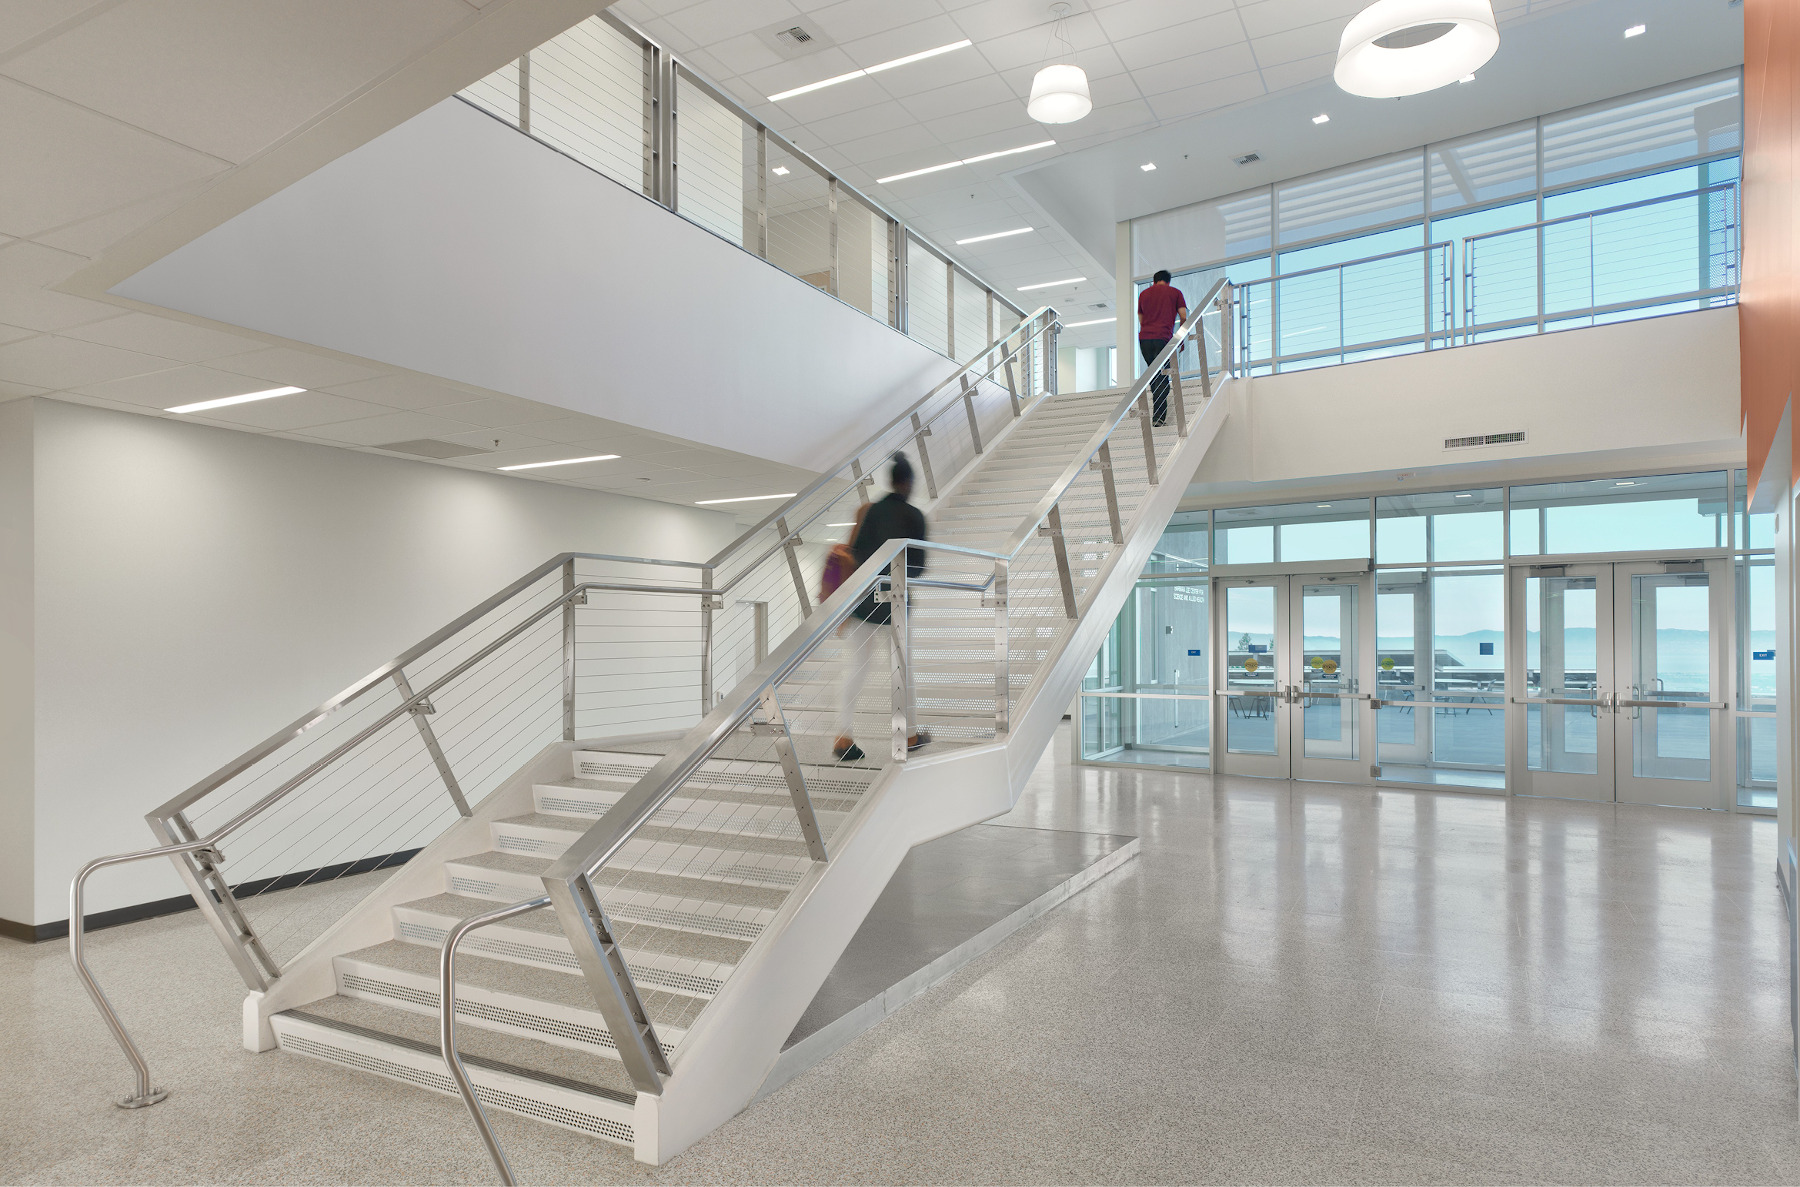 Merritt College - Barbara Lee Center for Science and Allied Health